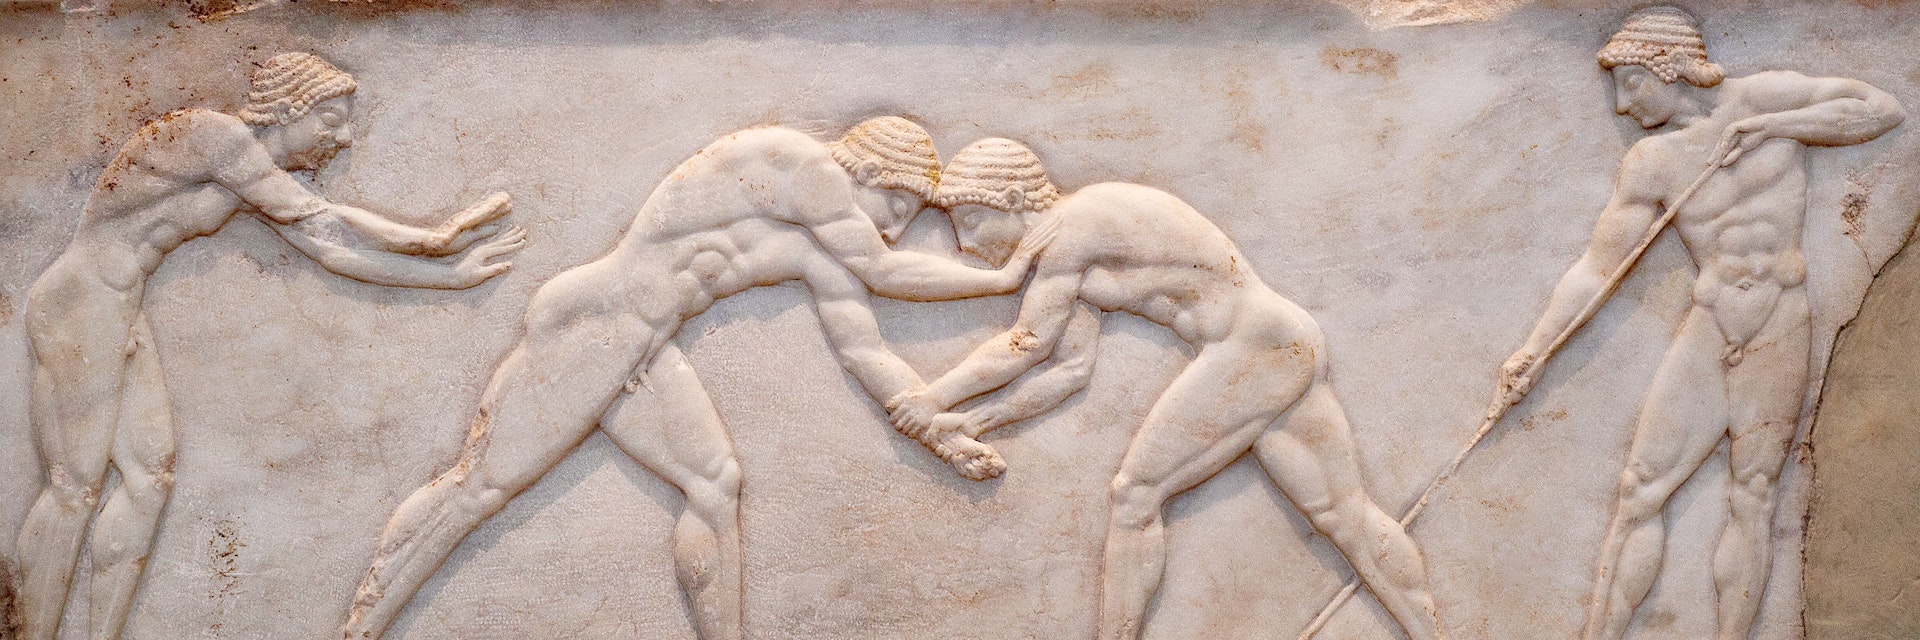 Ancient bas-relief on grave stele in Kerameikos with scene from Palaestra - wrestlers in action. On the left an athlete is ready to jump, on the right another one prepairing the pit. Athens, Greece; Shutterstock ID 1745203673; your: Erin Lenczycki; gl: 65050 ; netsuite: Digital; full: Digital
1745203673